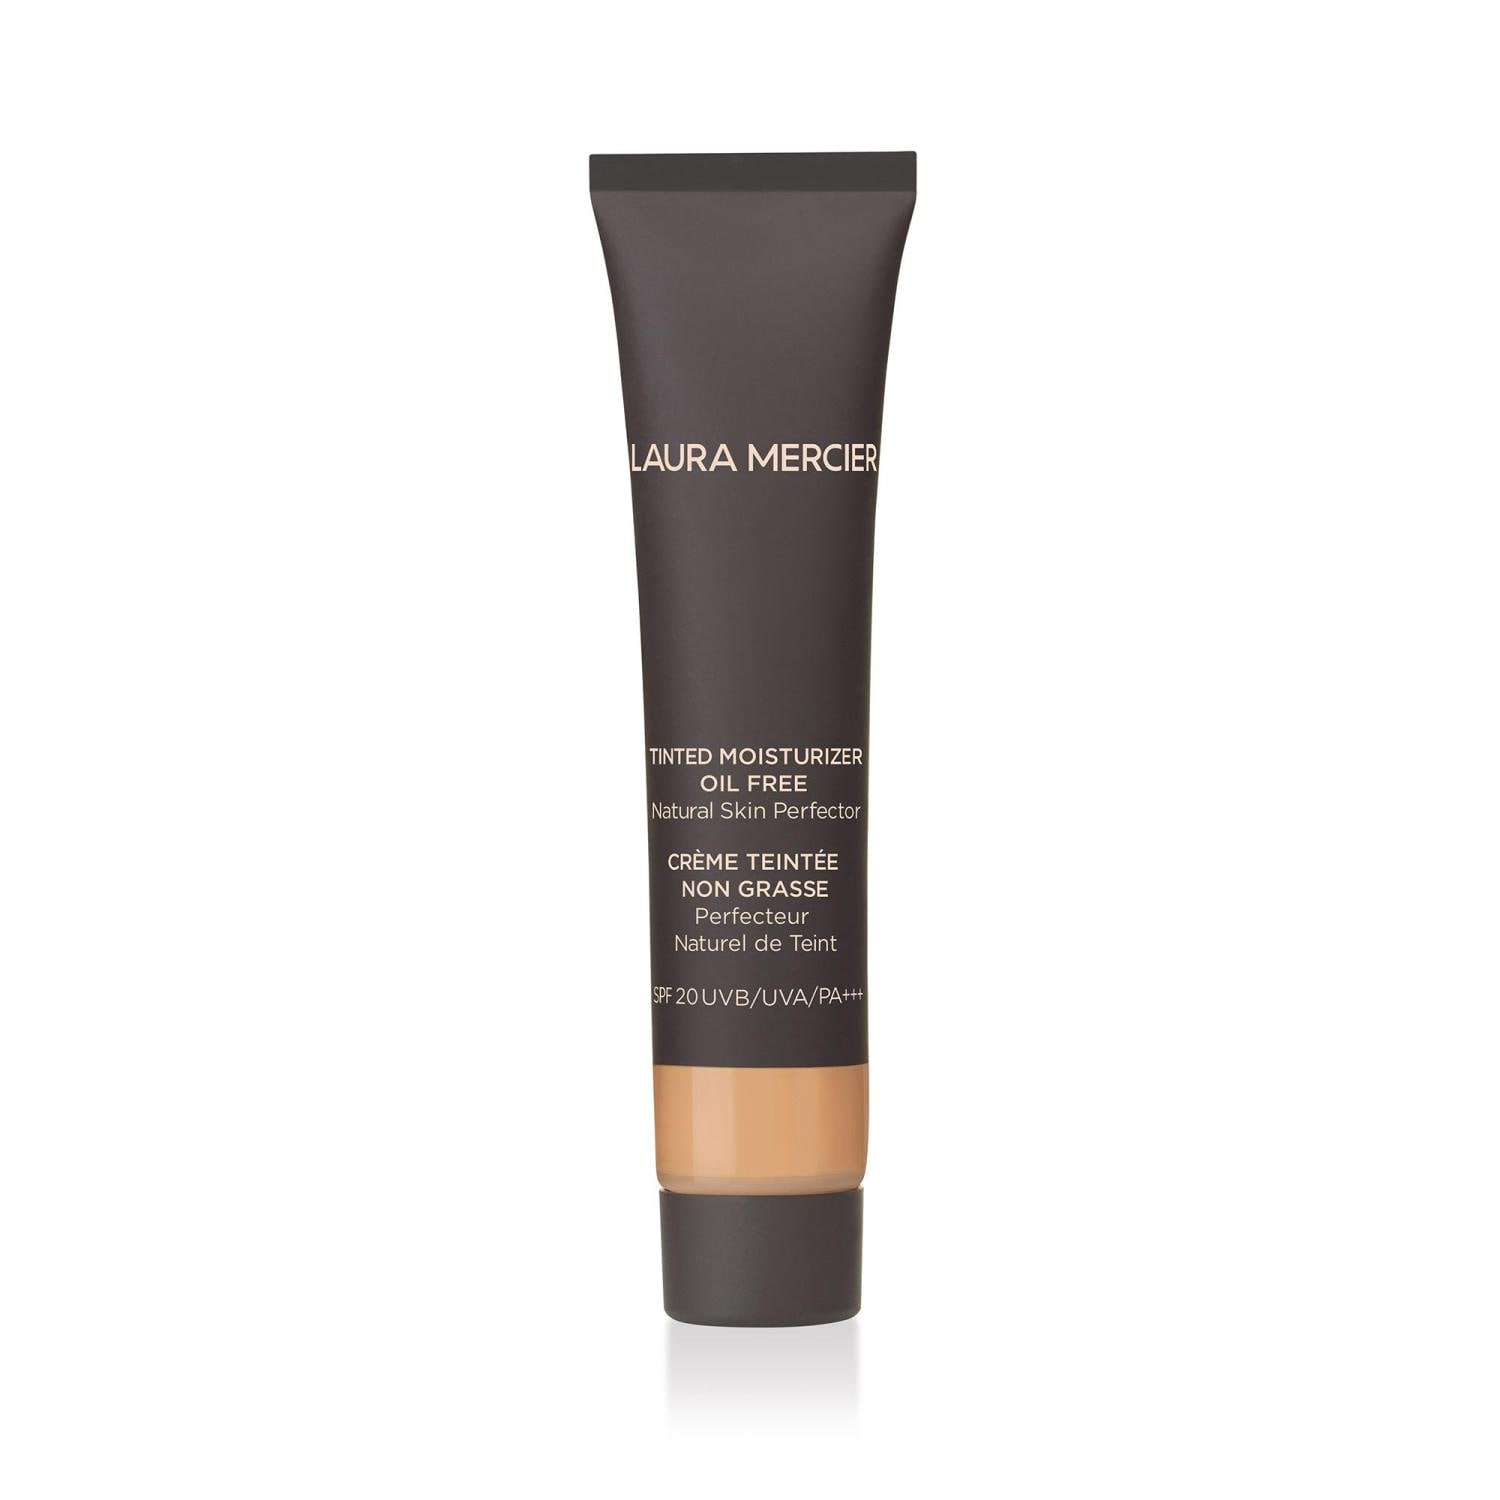 Laura Mercier Beauty To Go Tinted Moisturizer Oil Free Natural Skin Perfector SPF 20 - Travel Size, Nr. 2N1 - NUDE